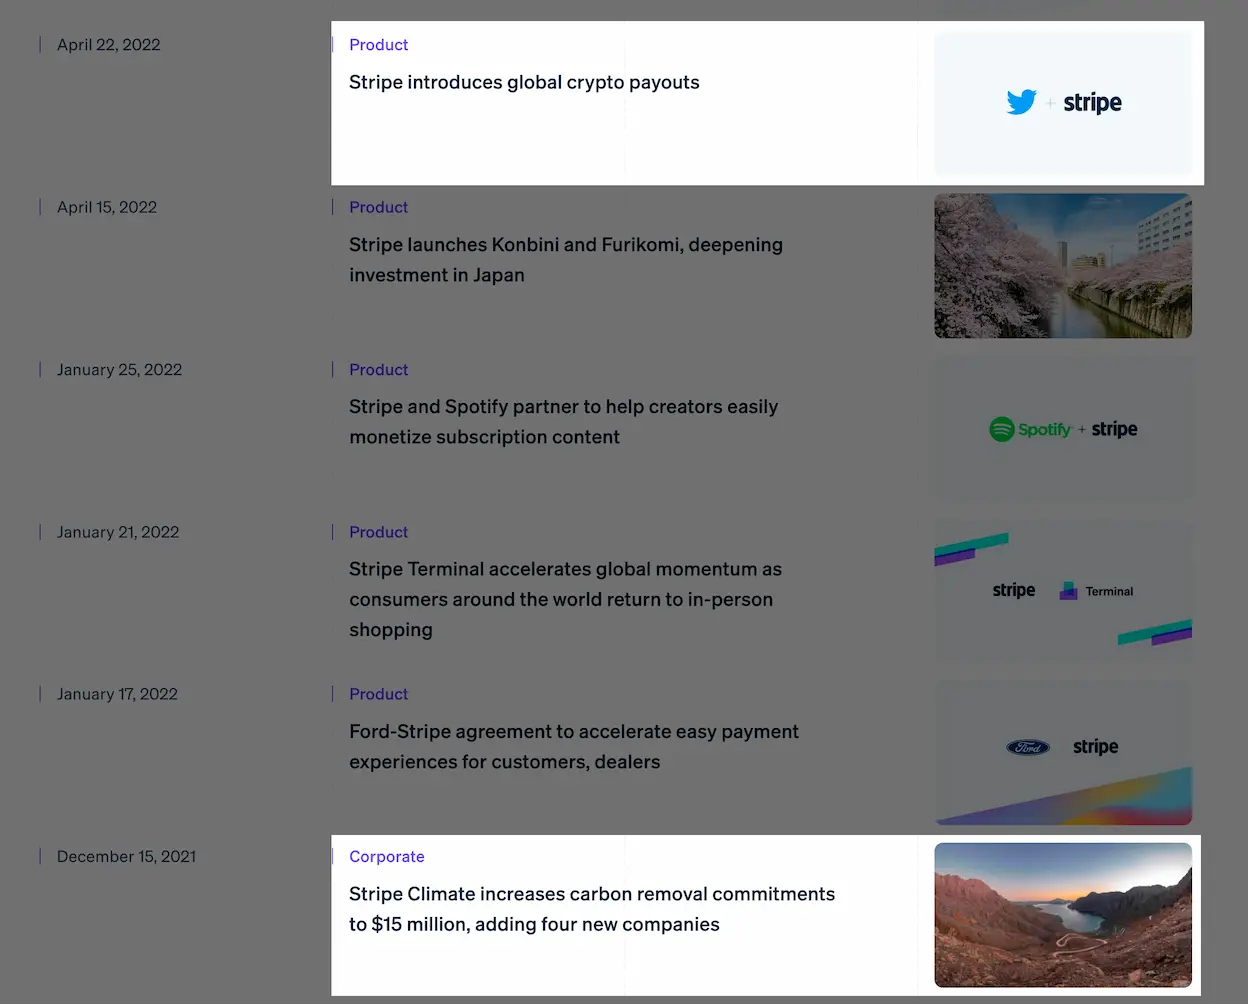 A screenshot of a list of Stripe news. One title from December 2021 reads "Stripe Climate increases carbon removal commitments to $15 million", while another from April 2022 announces that "Stripe introduces global crypto payouts".